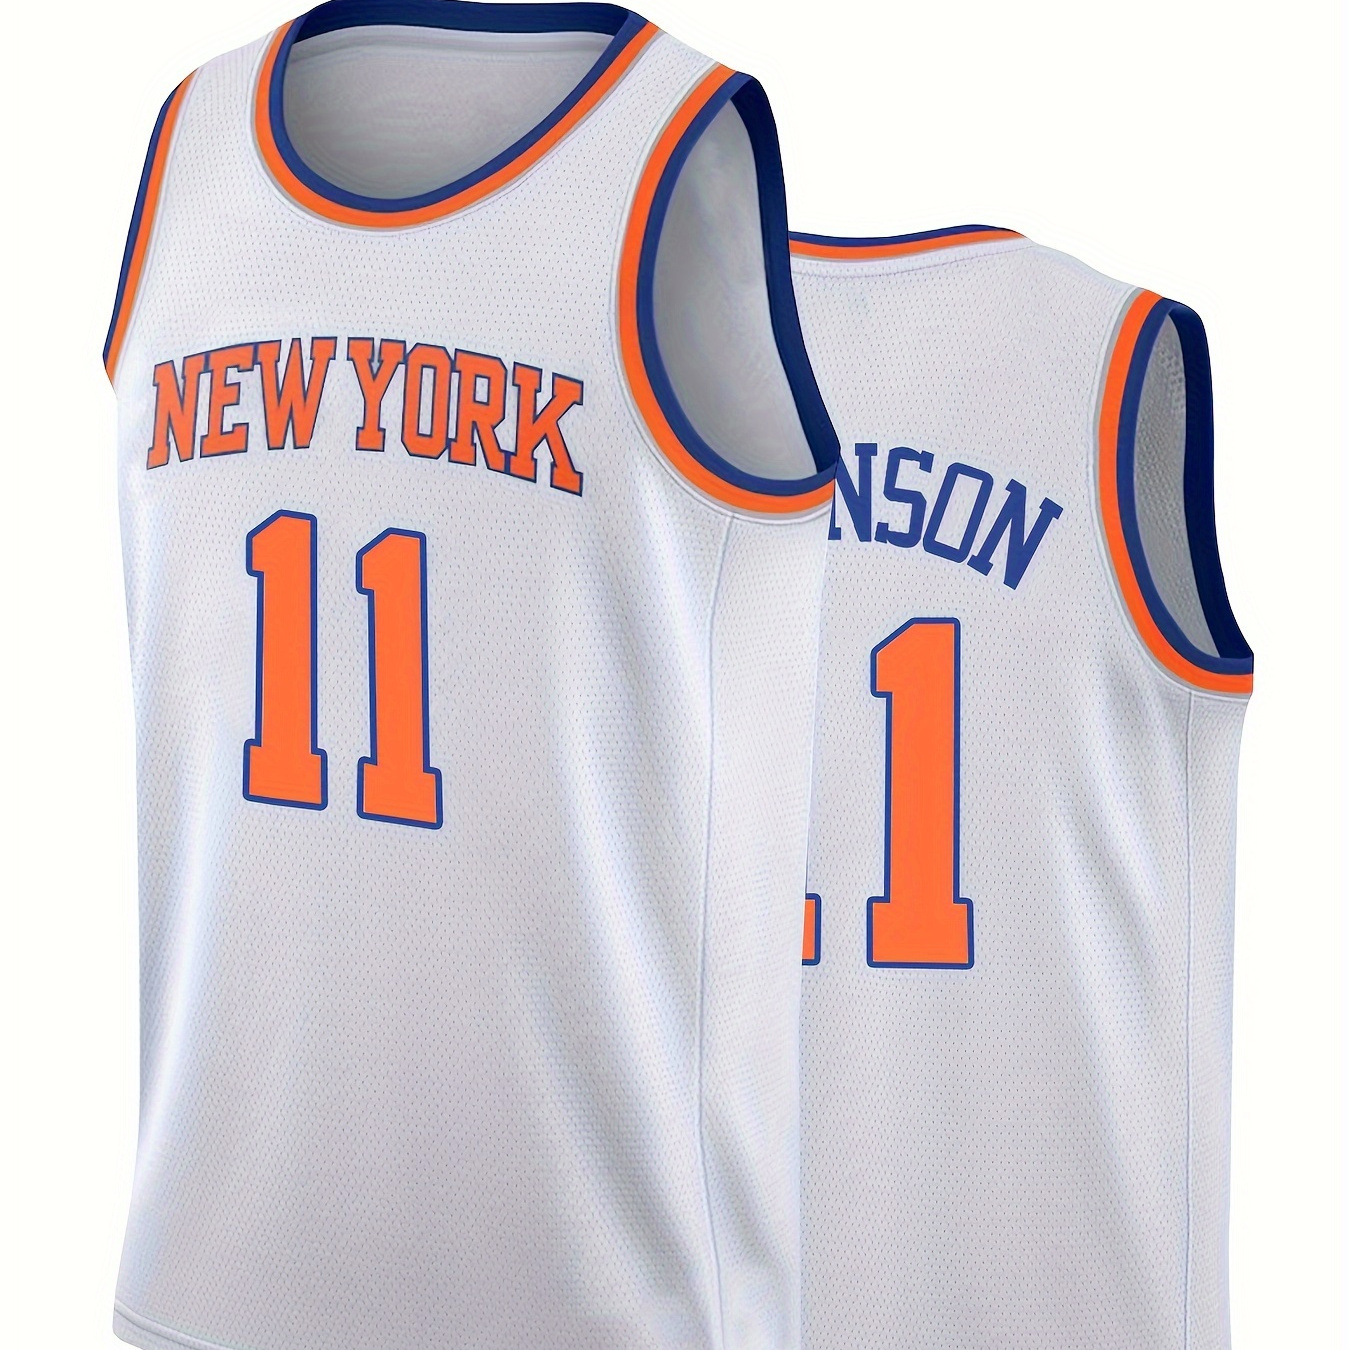 

Men's Basketball Tank Top, Letter & Number 11 Embroidery Sports Top, Breathable Sports Uniform For Training And Competition